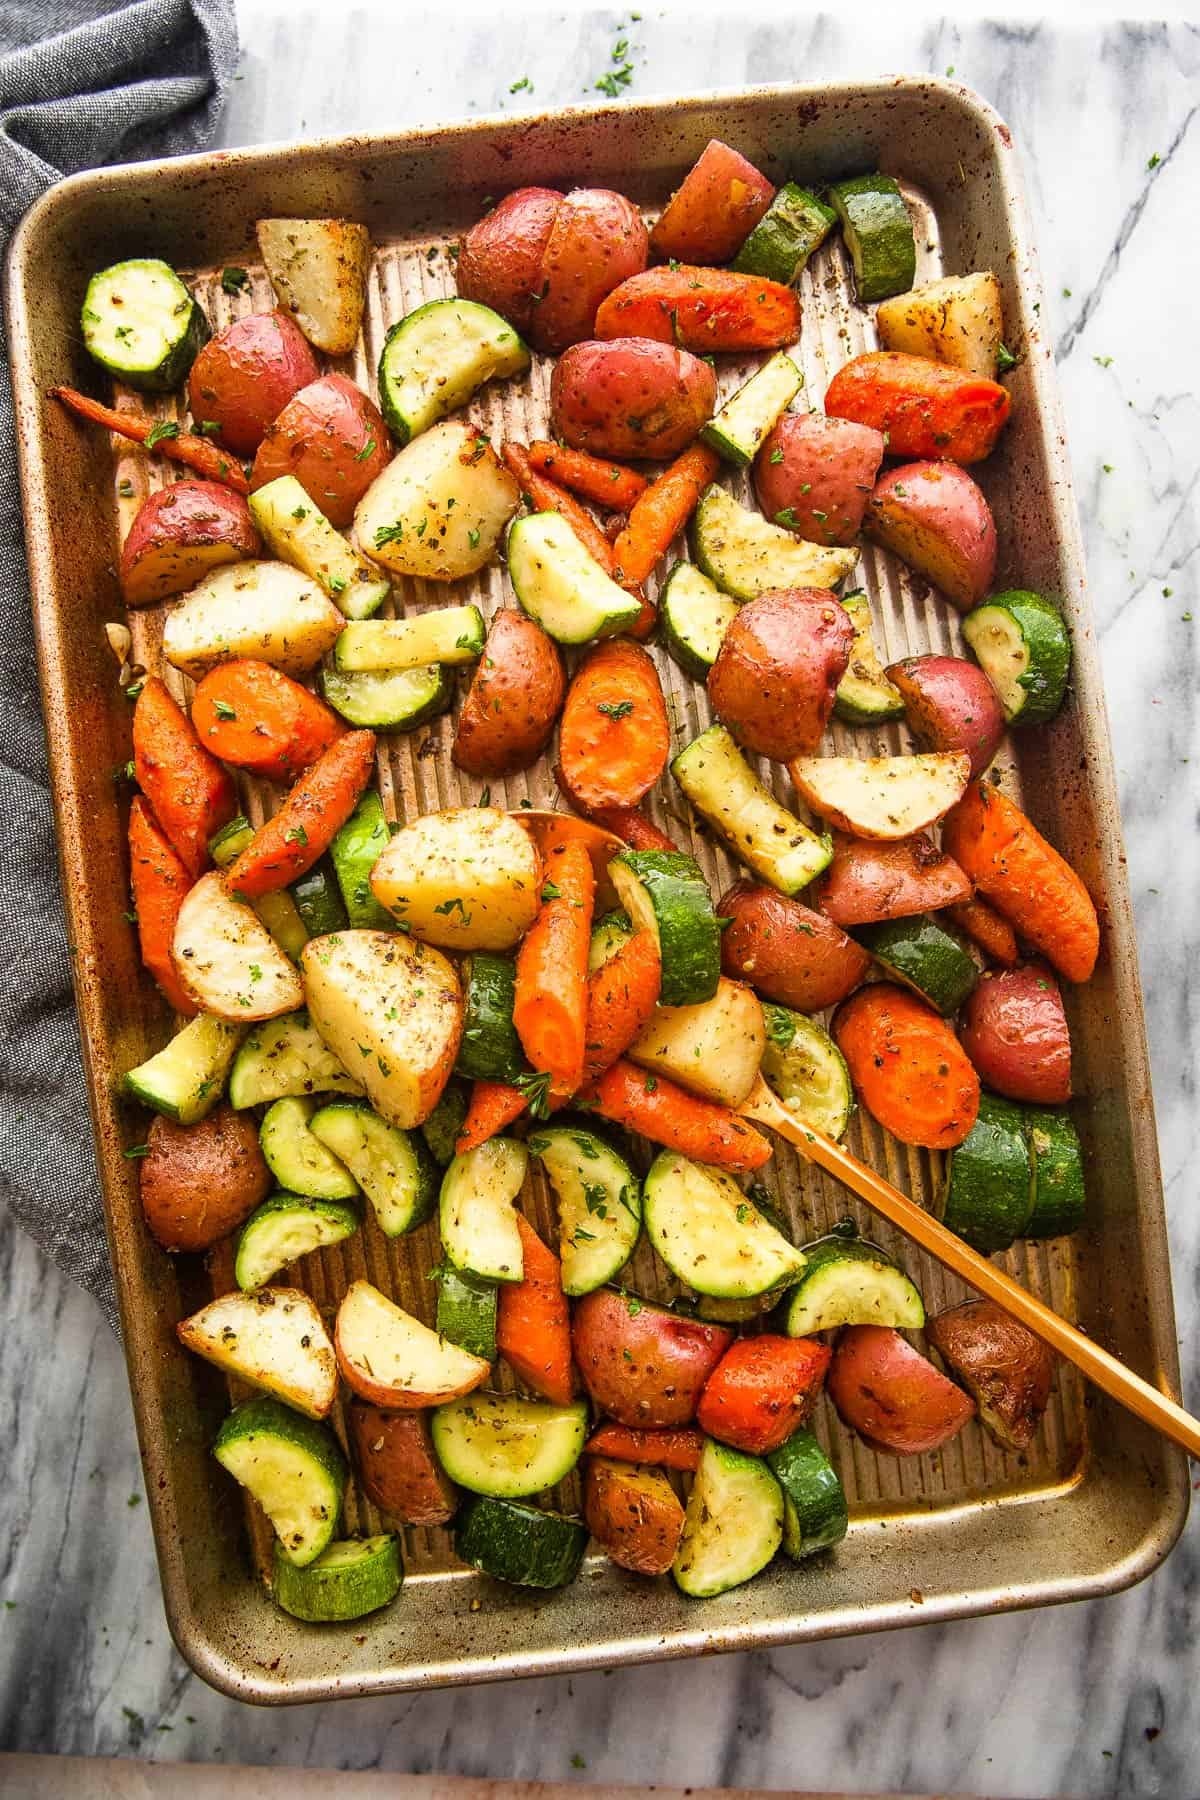 baking pan with roasted potatoes, carrots, and zucchini